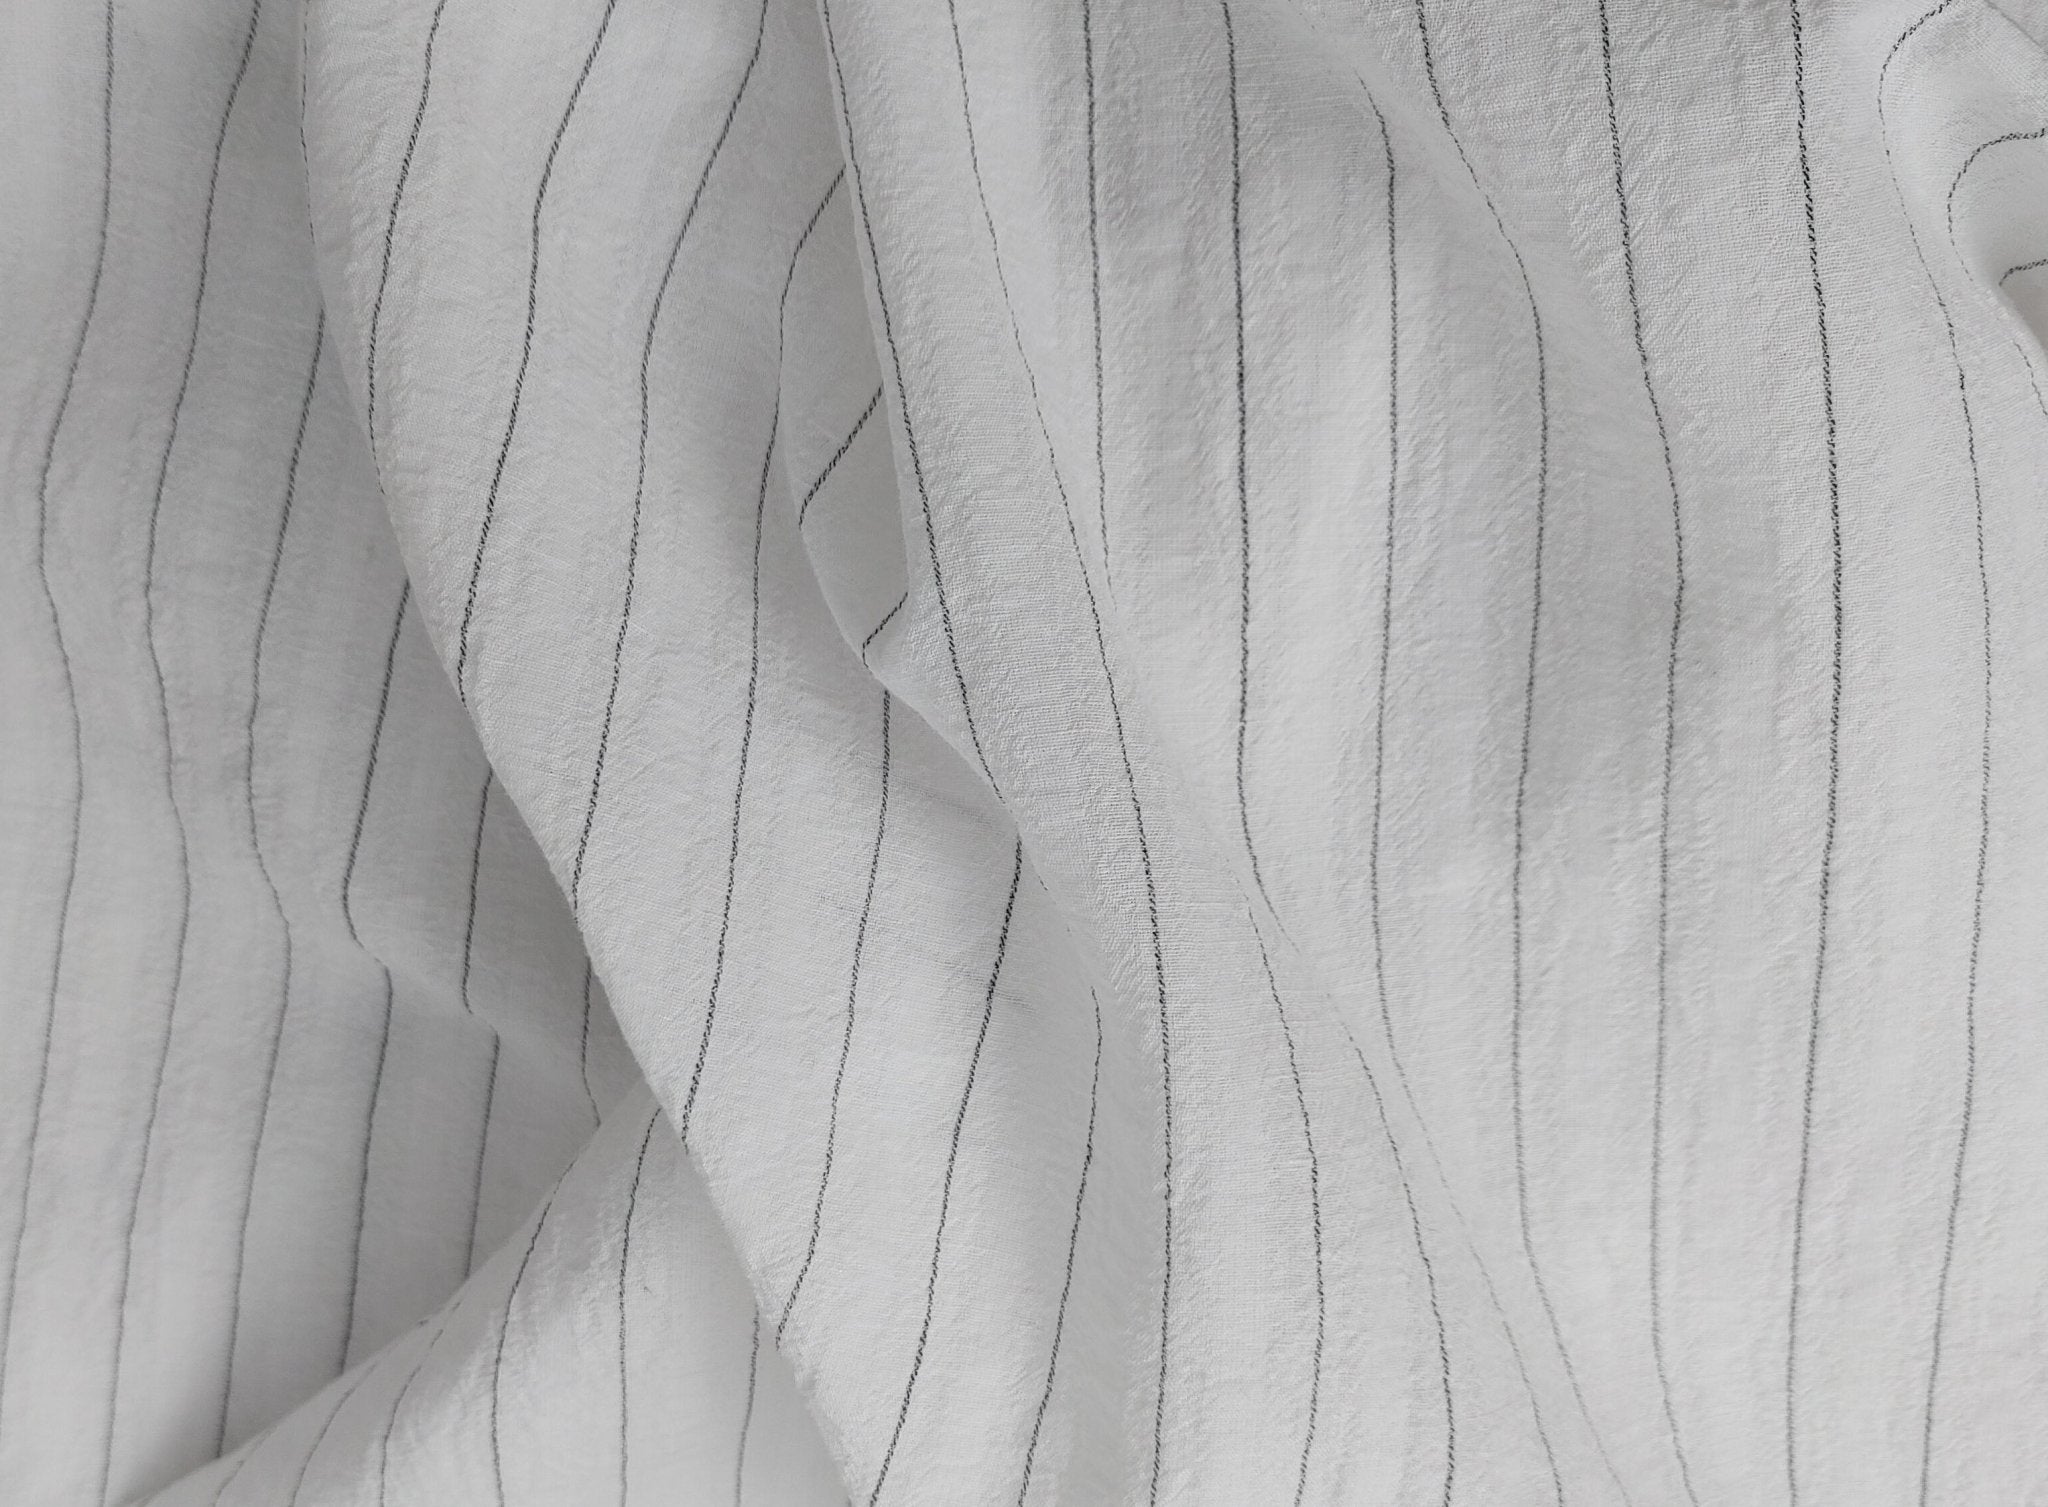 Airy Stripes: Linen with High-Twisted Cotton Lightweight Stripe Fabric 6109 6110 6111 6049 - The Linen Lab - White_2